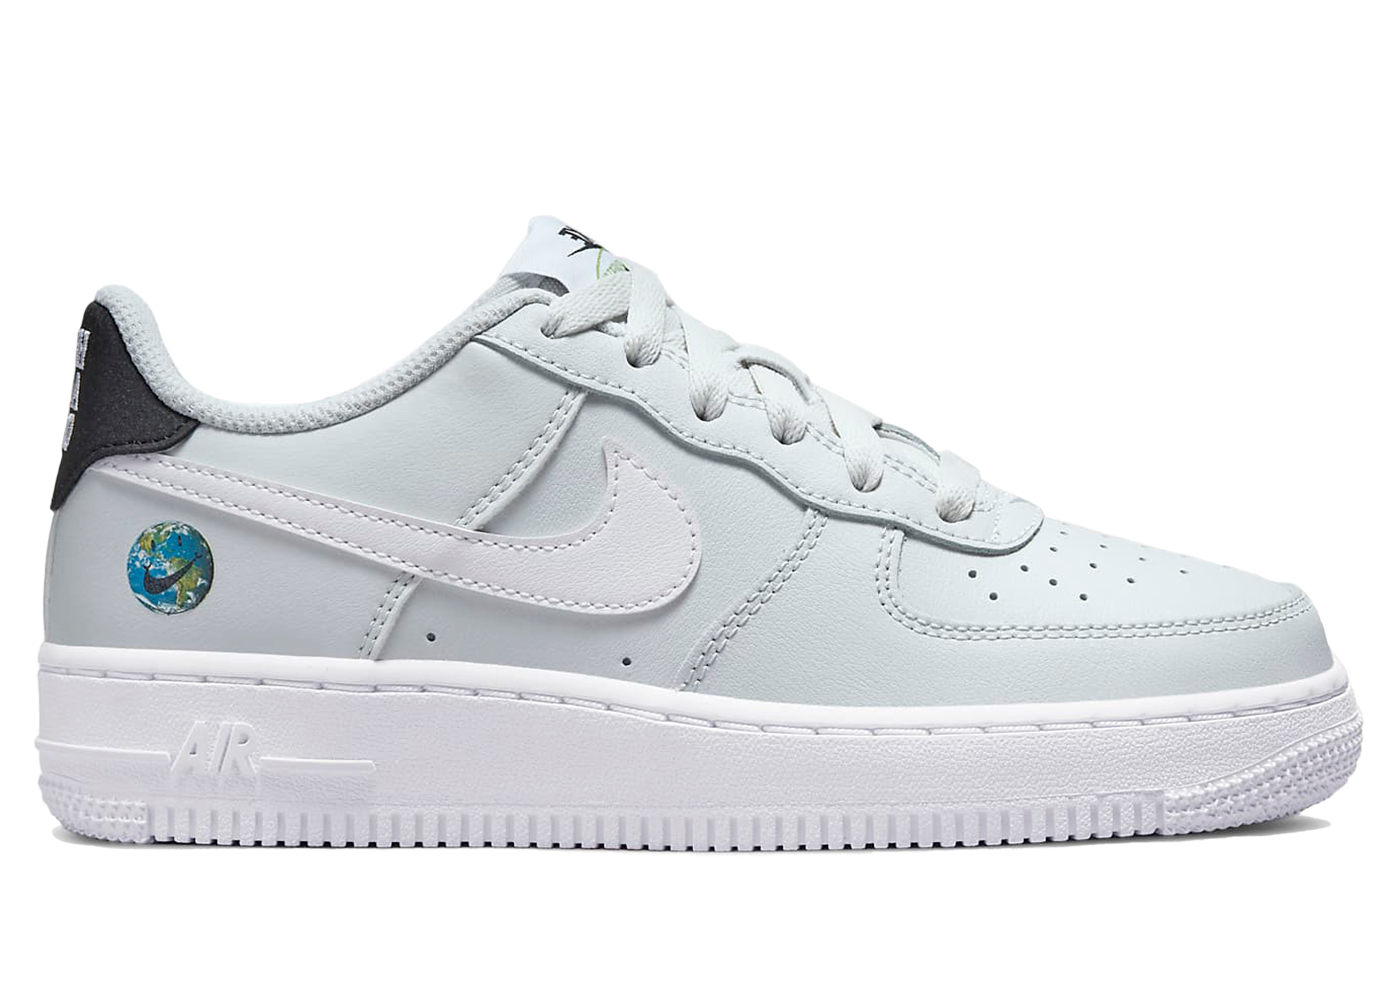 Nike Air Force 1 Low Have a Nike Day Pink Foam (GS) Kids' - AV0742 